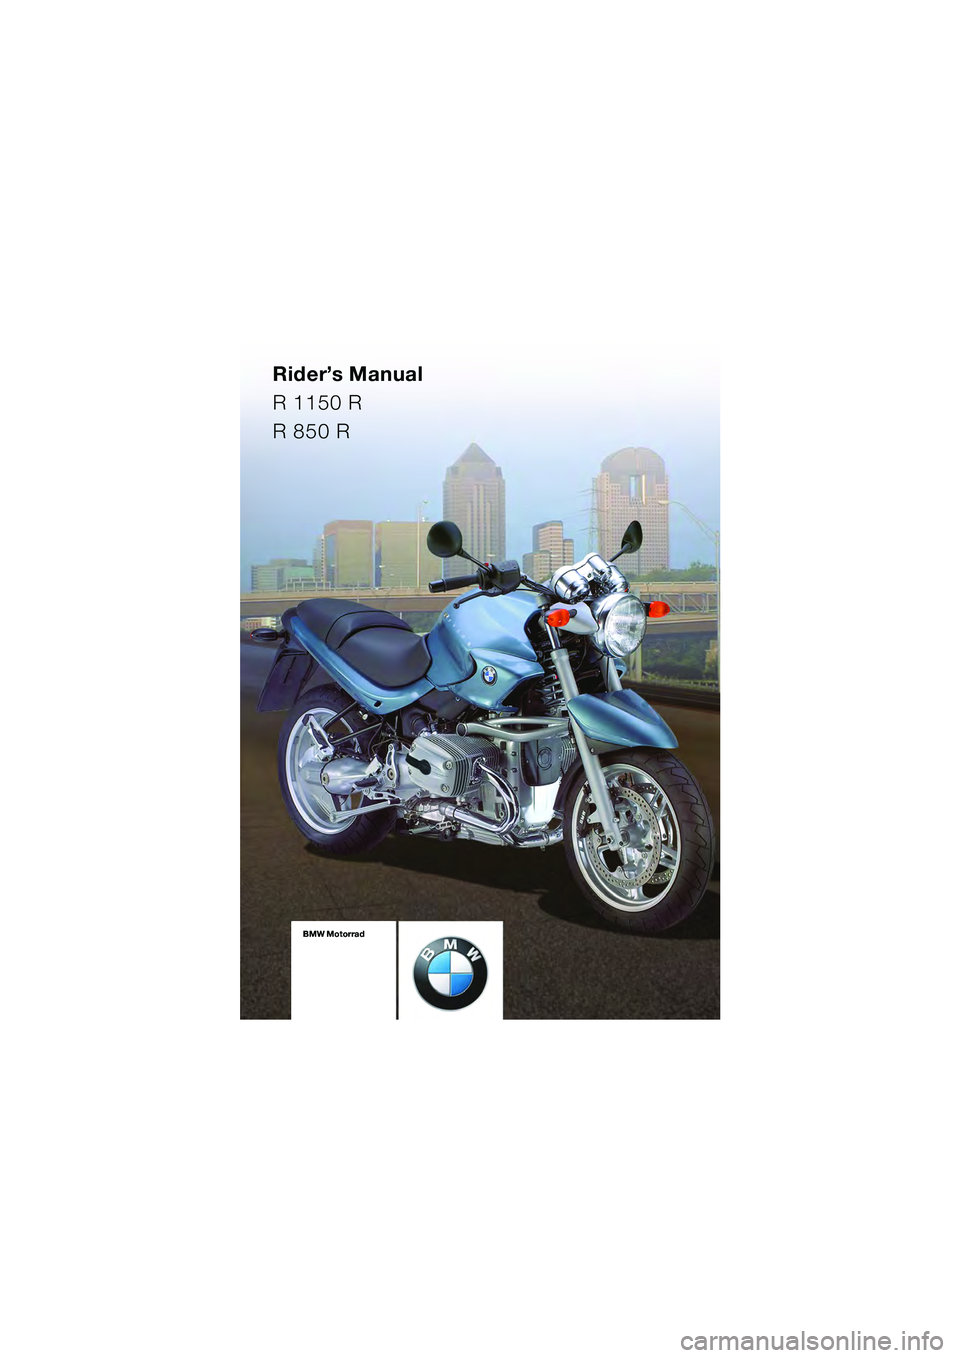 BMW MOTORRAD R 850 R 2004  Riders Manual (in English) Rider’s Manual
R 1150 R
R 850 R
BMW Motorrad
On-board  
documentation
consisting of  
Riders Manual  
and Maintenance  
InstructionsBMW Motorrad
On-board  
documentation
consisting of  
Riders Man